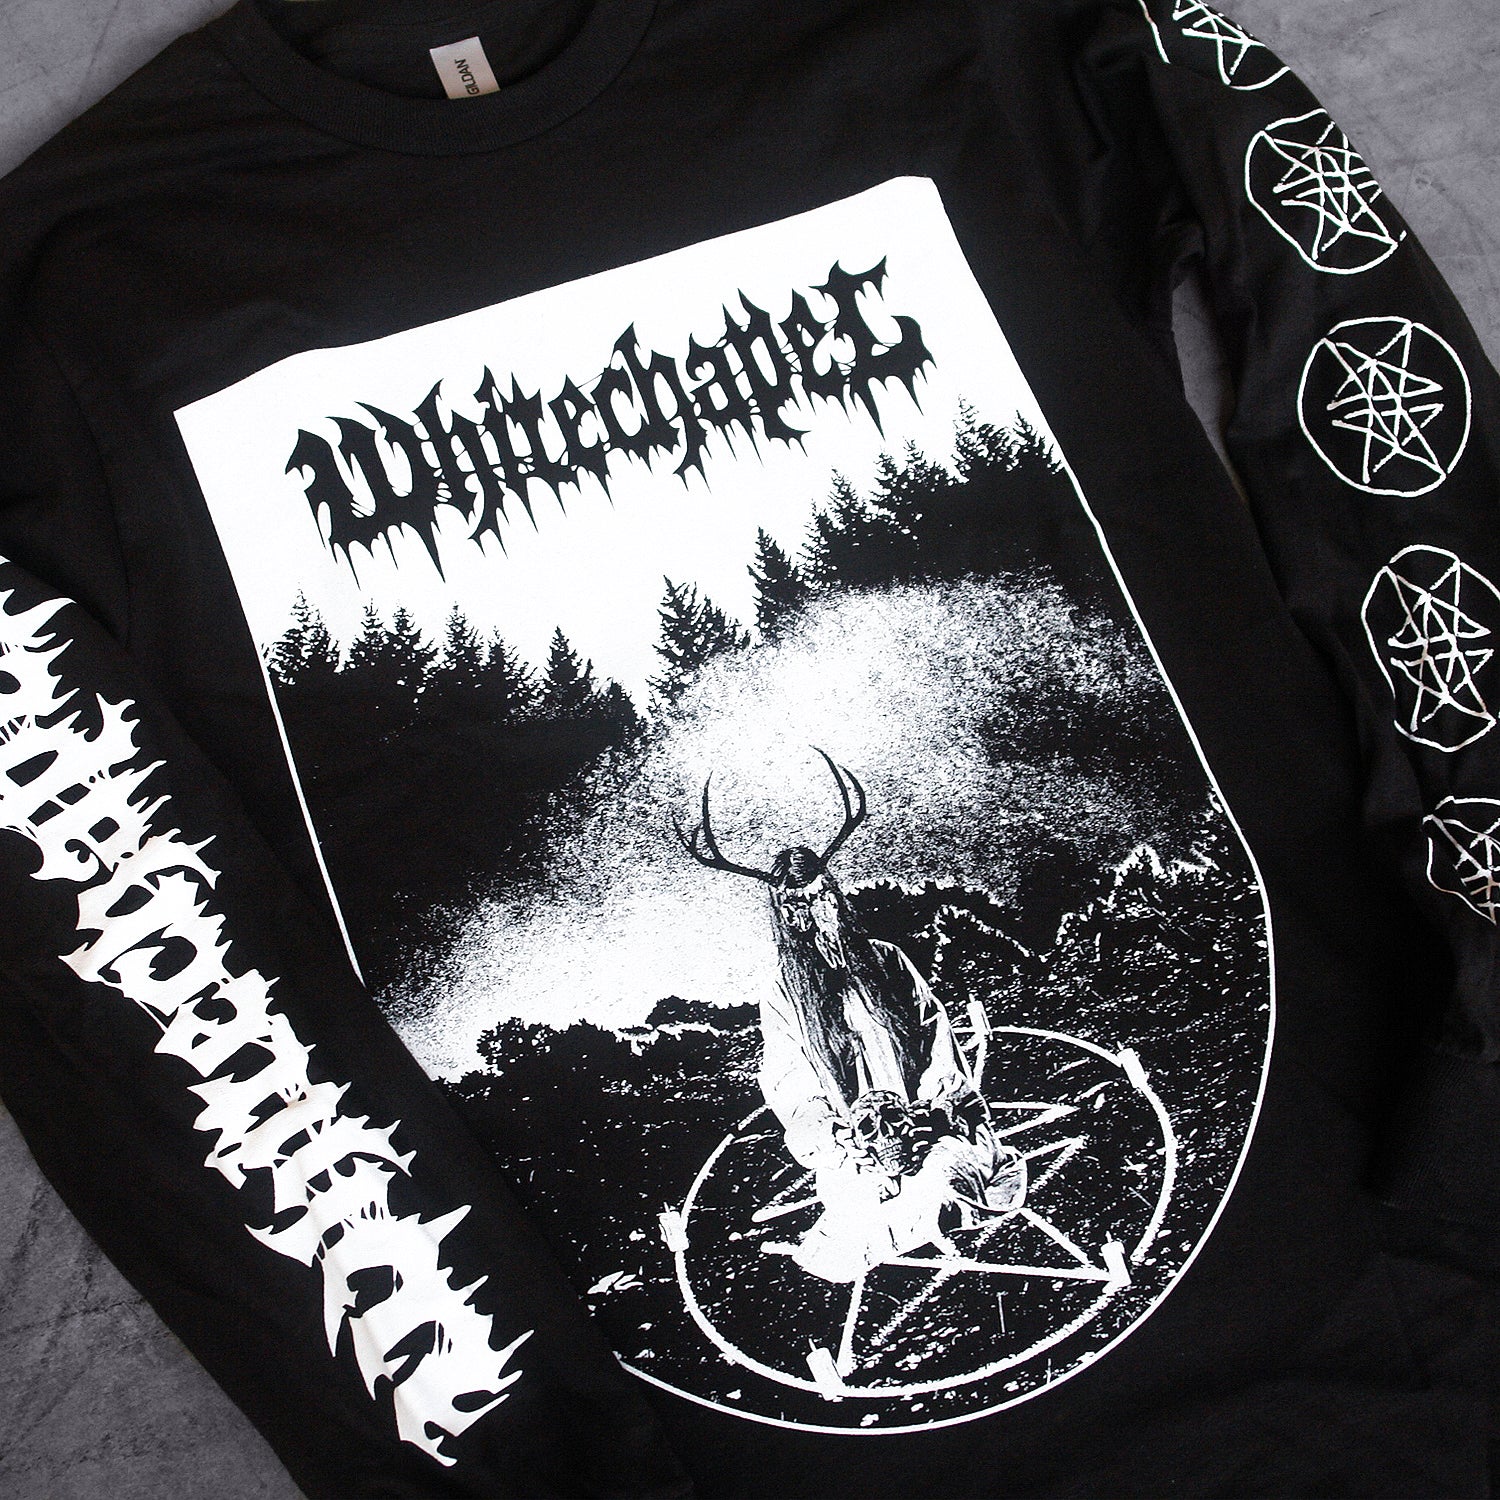 close up image of a black long sleeve tee shirt laid on a concrete floor. front of shirt has full body print in white that says whitechapel at the top over a scene of a ritual in the woods with a pentagram. left sleeve says whitechapel and right sleeve has five pentagrams